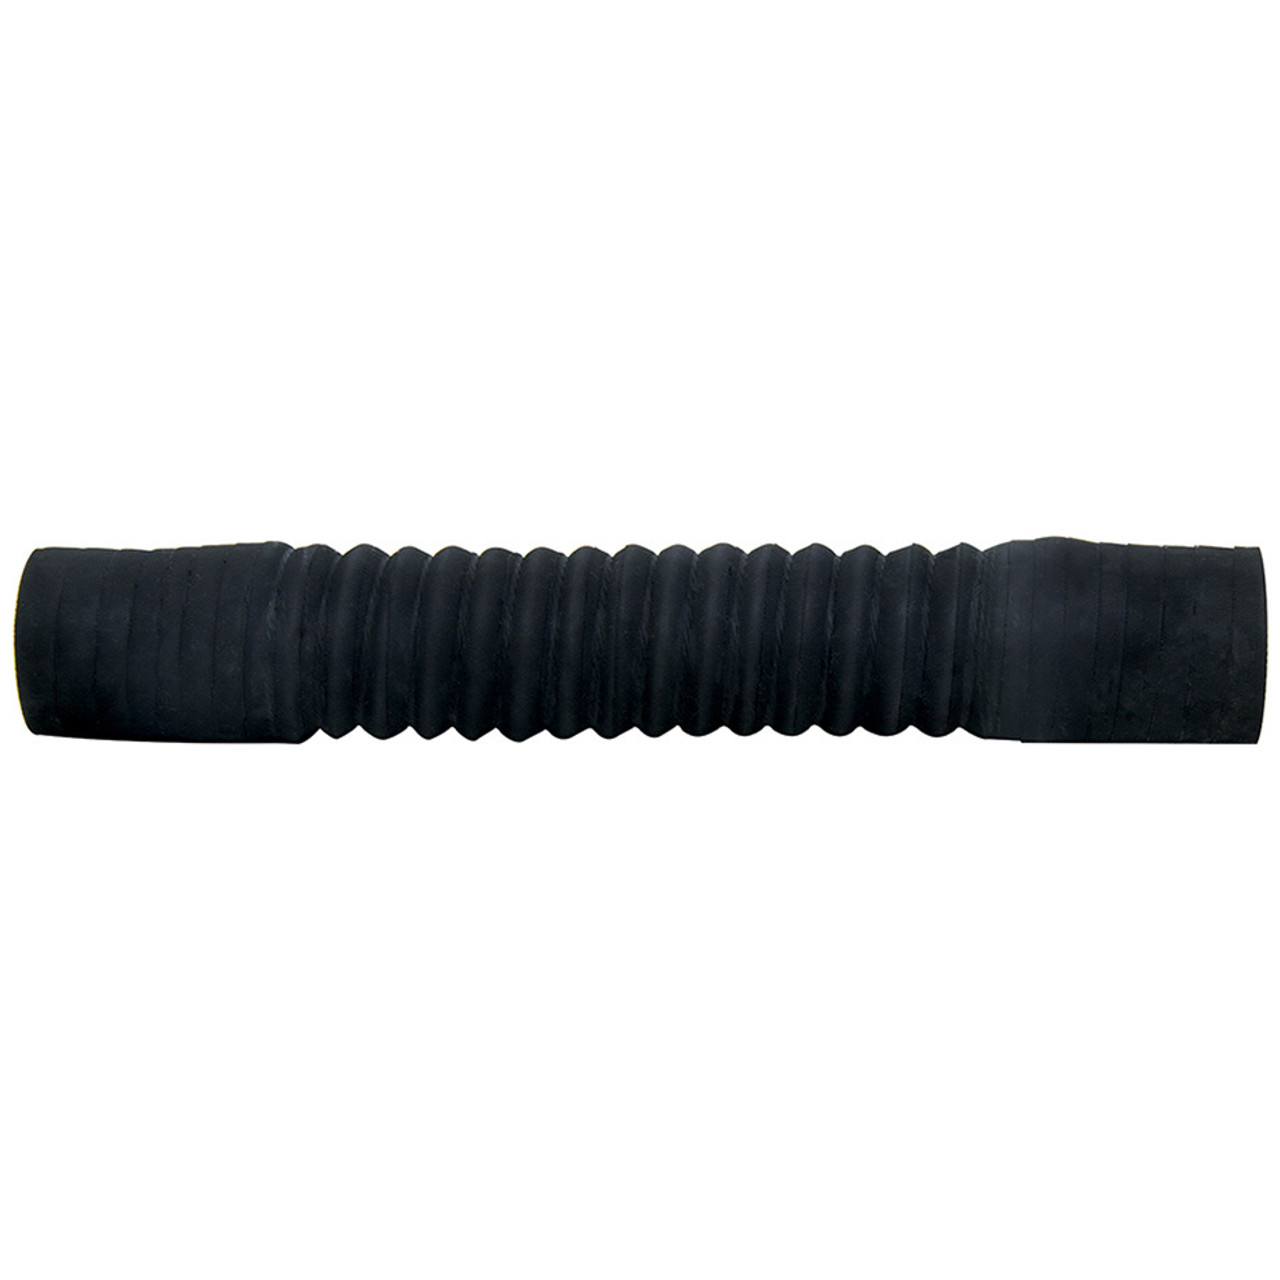 This hose has the reinforcement spring molded into hose.